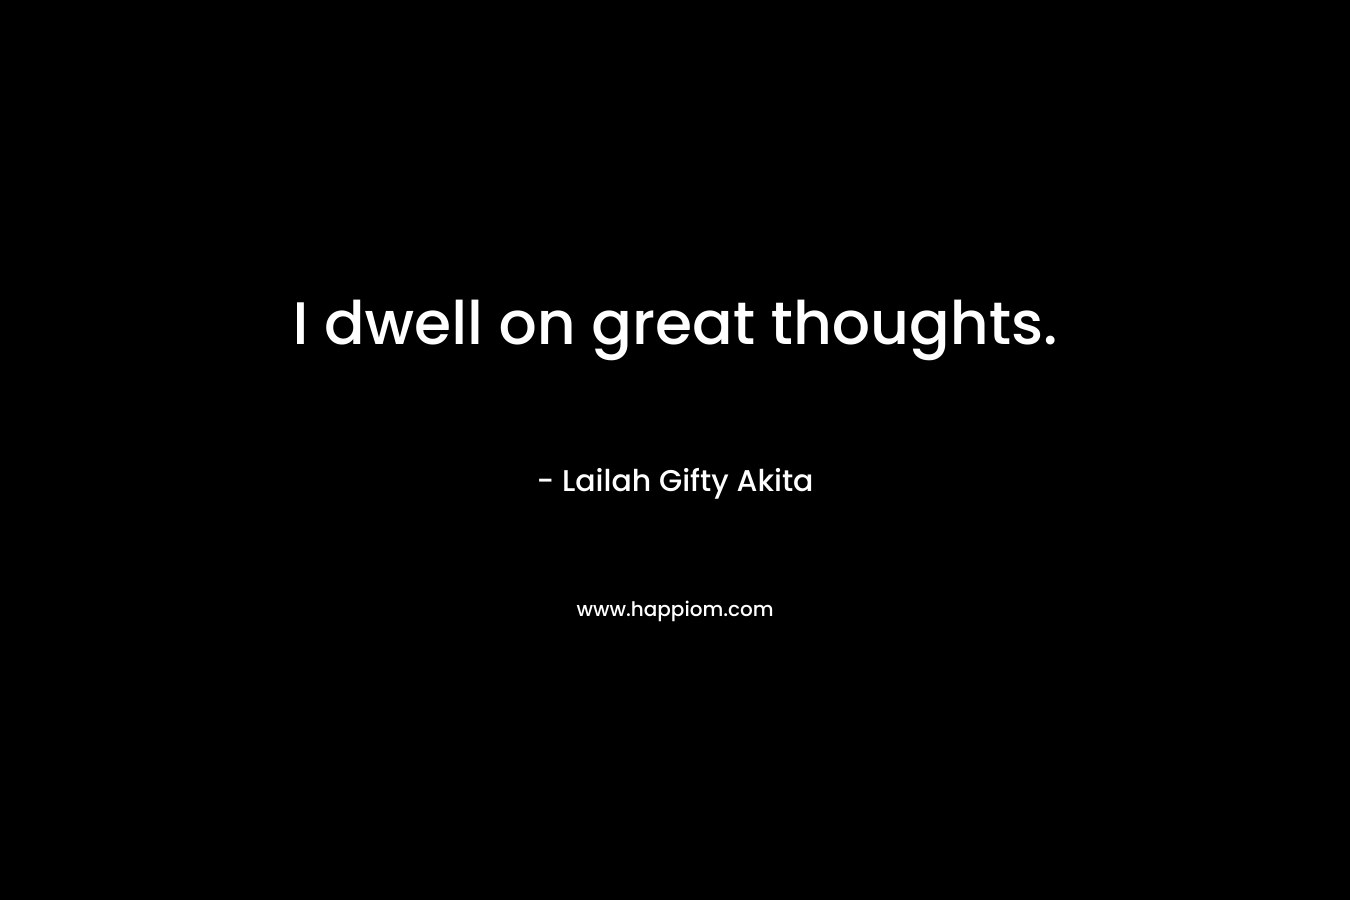 I dwell on great thoughts.